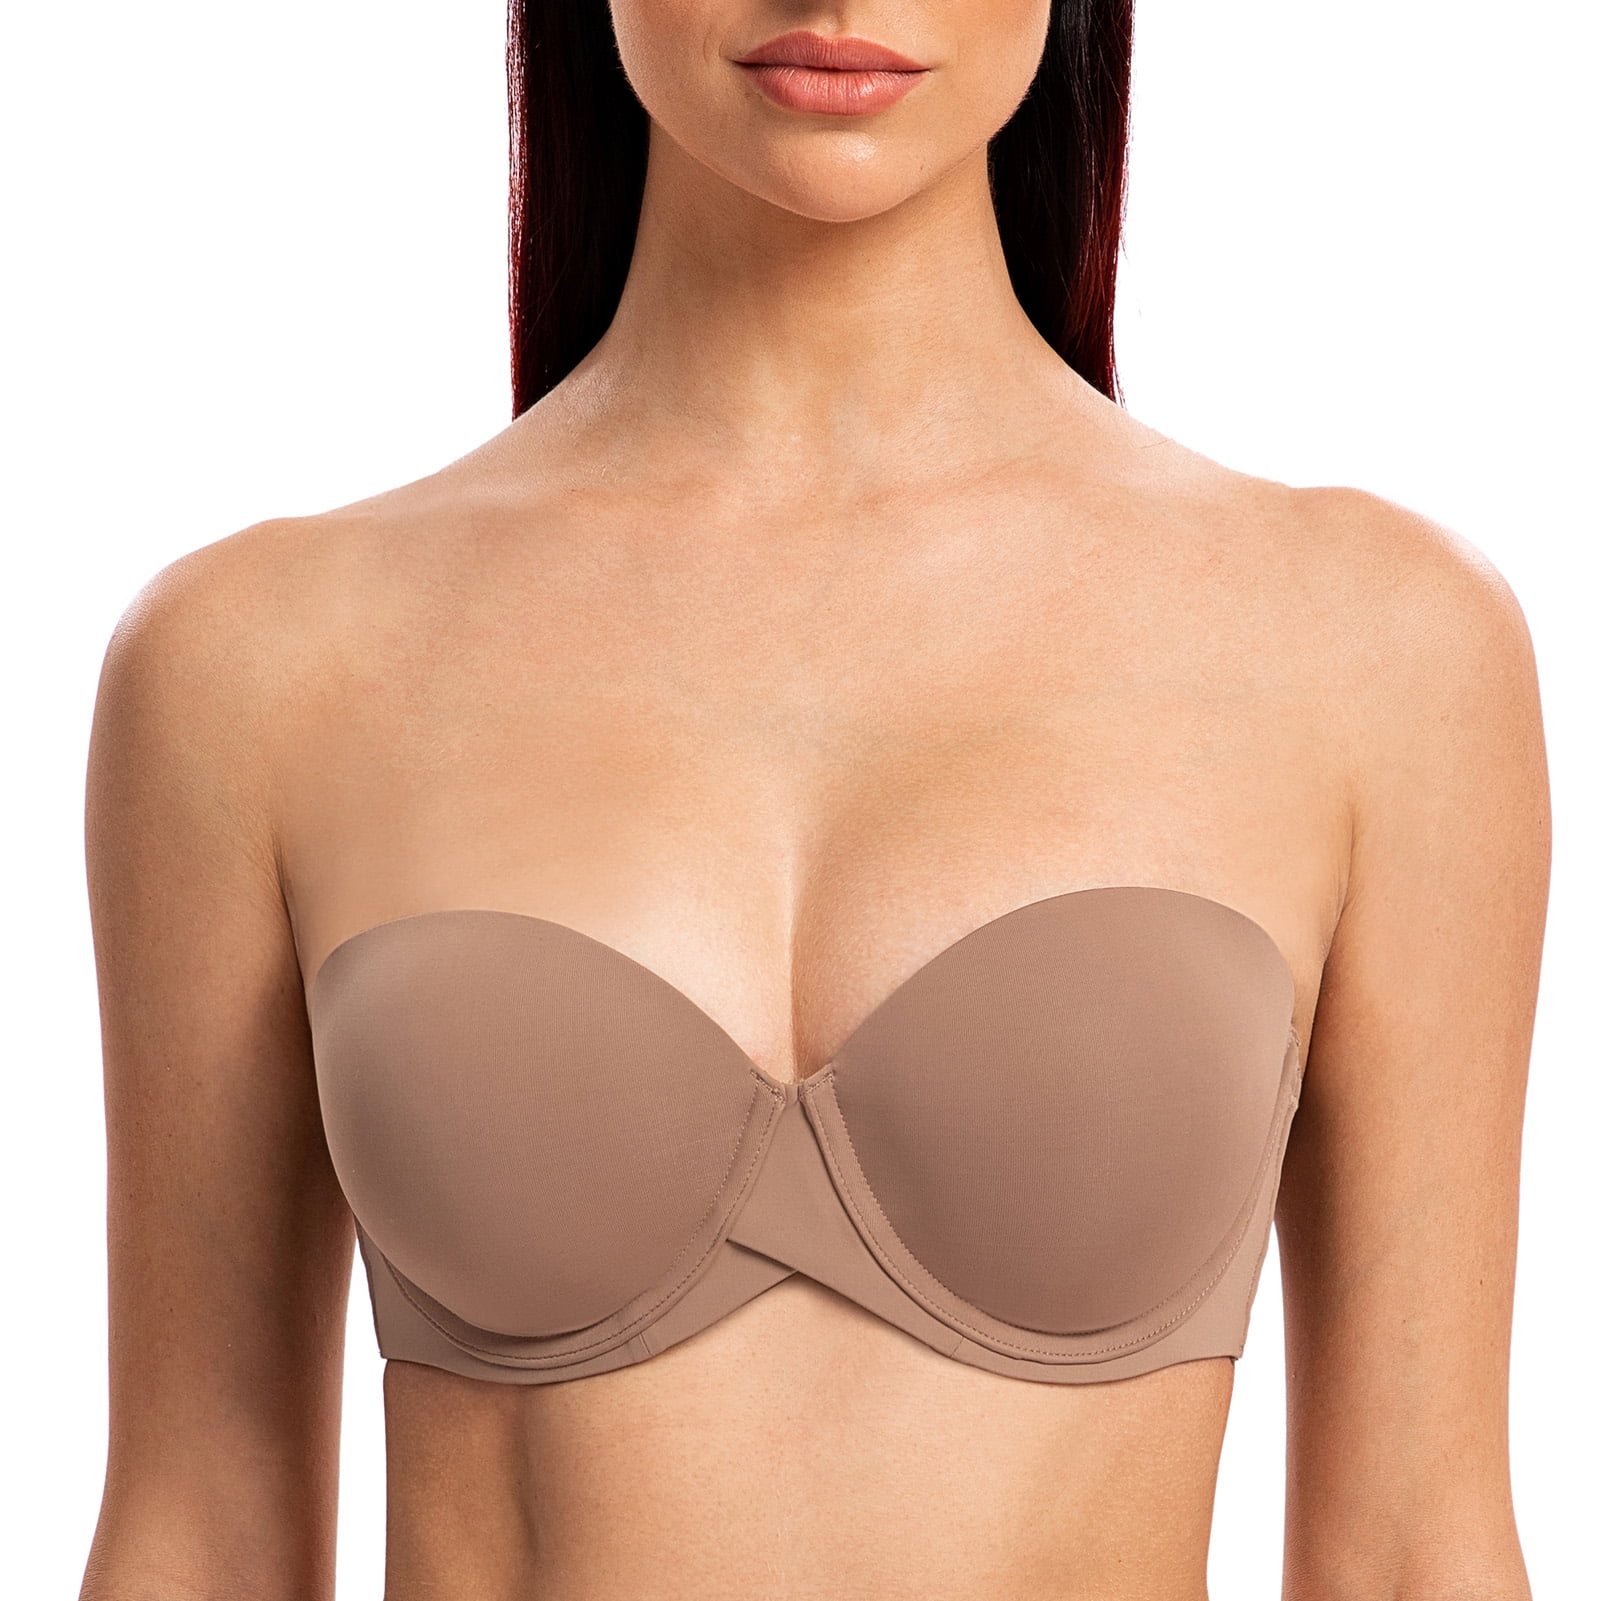 MELENECA Women's Stay Put Padded Cup with Lift Underwire